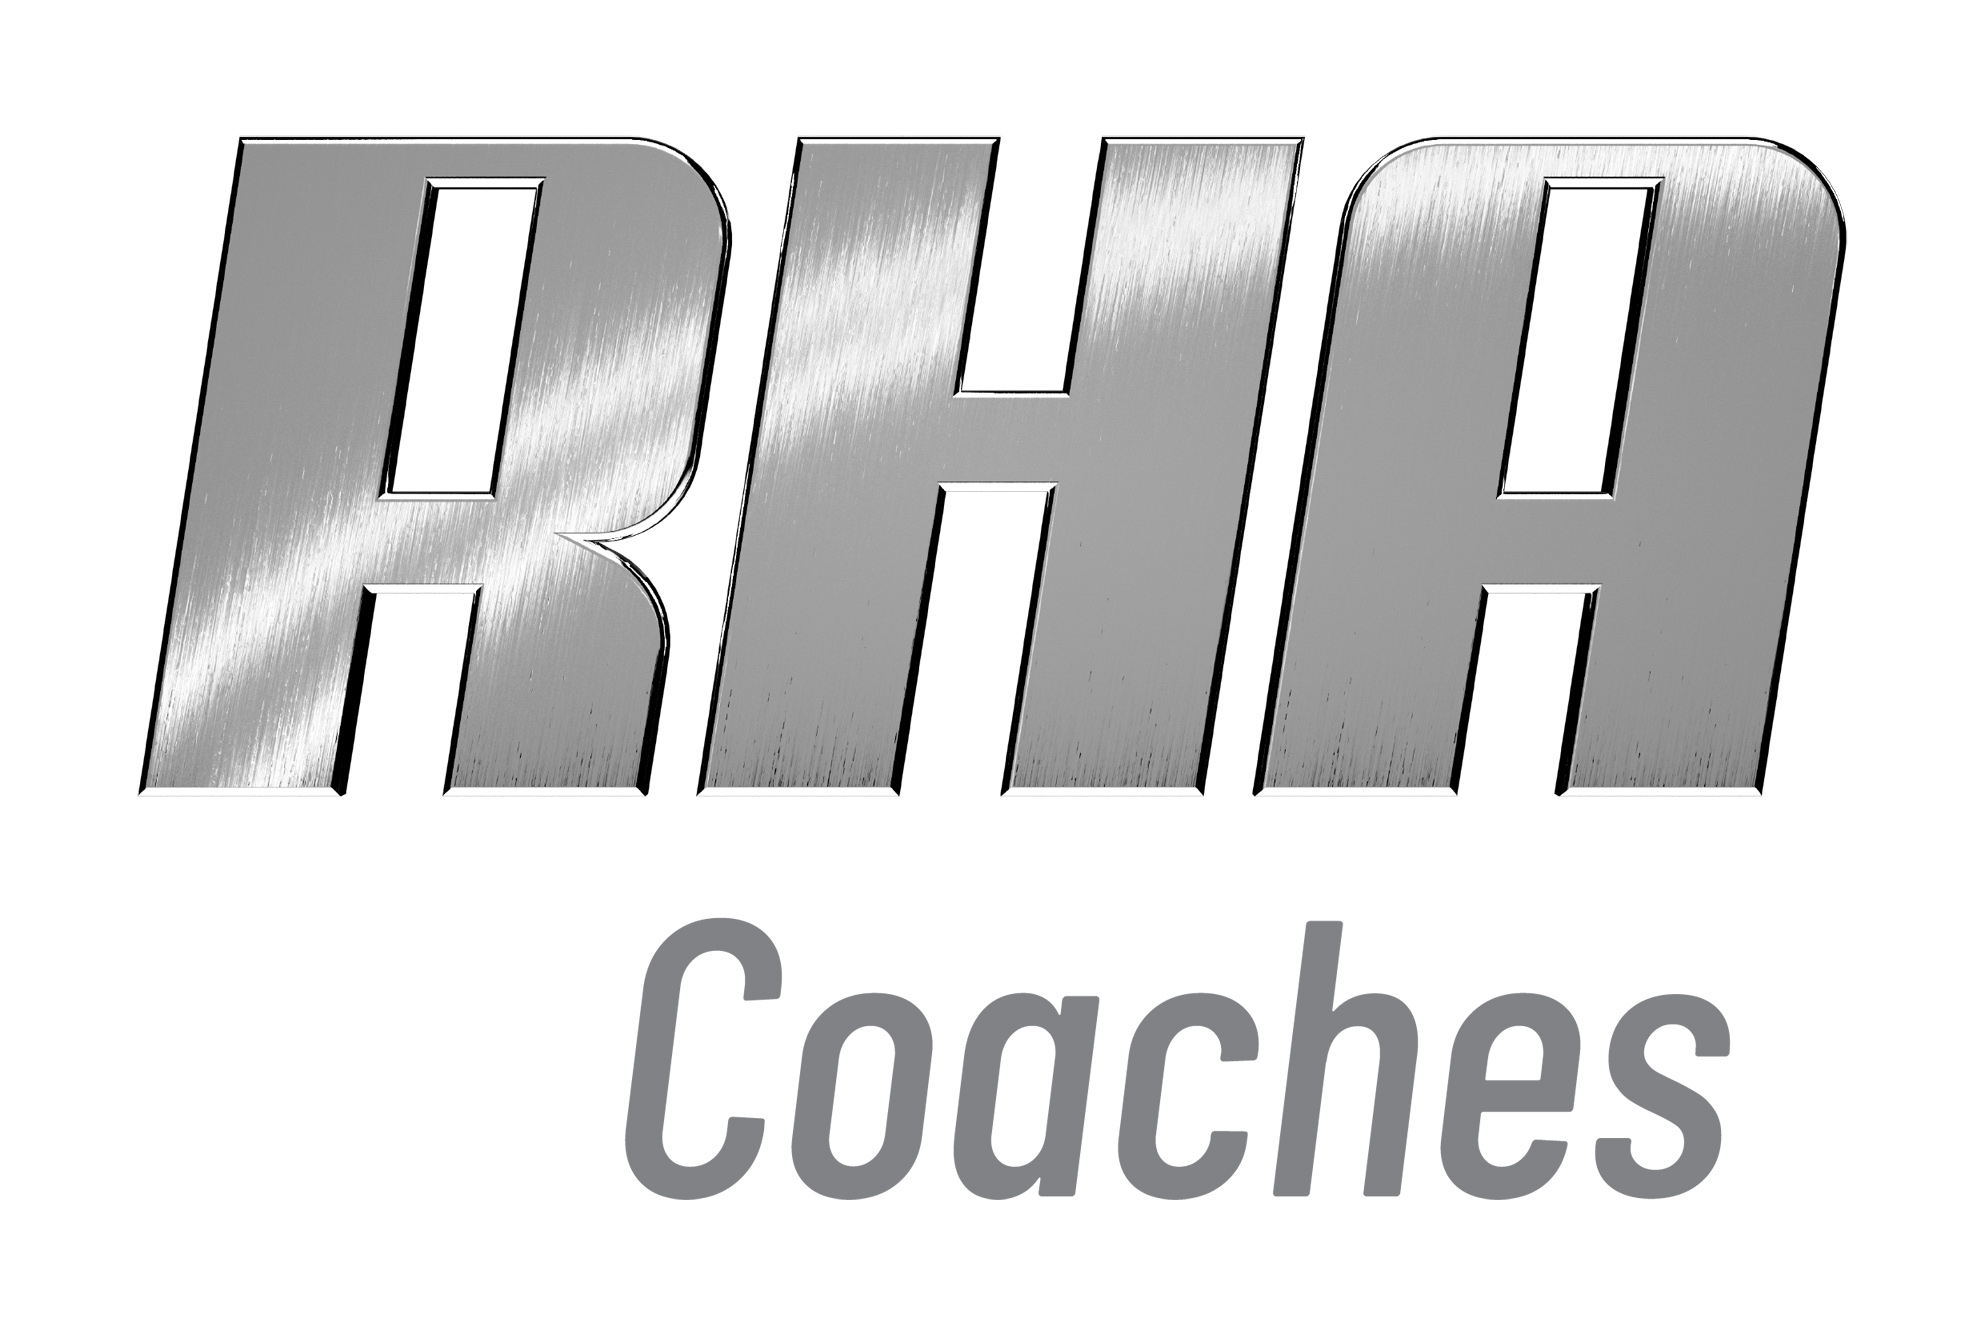 National Coach Week launches on 8th April